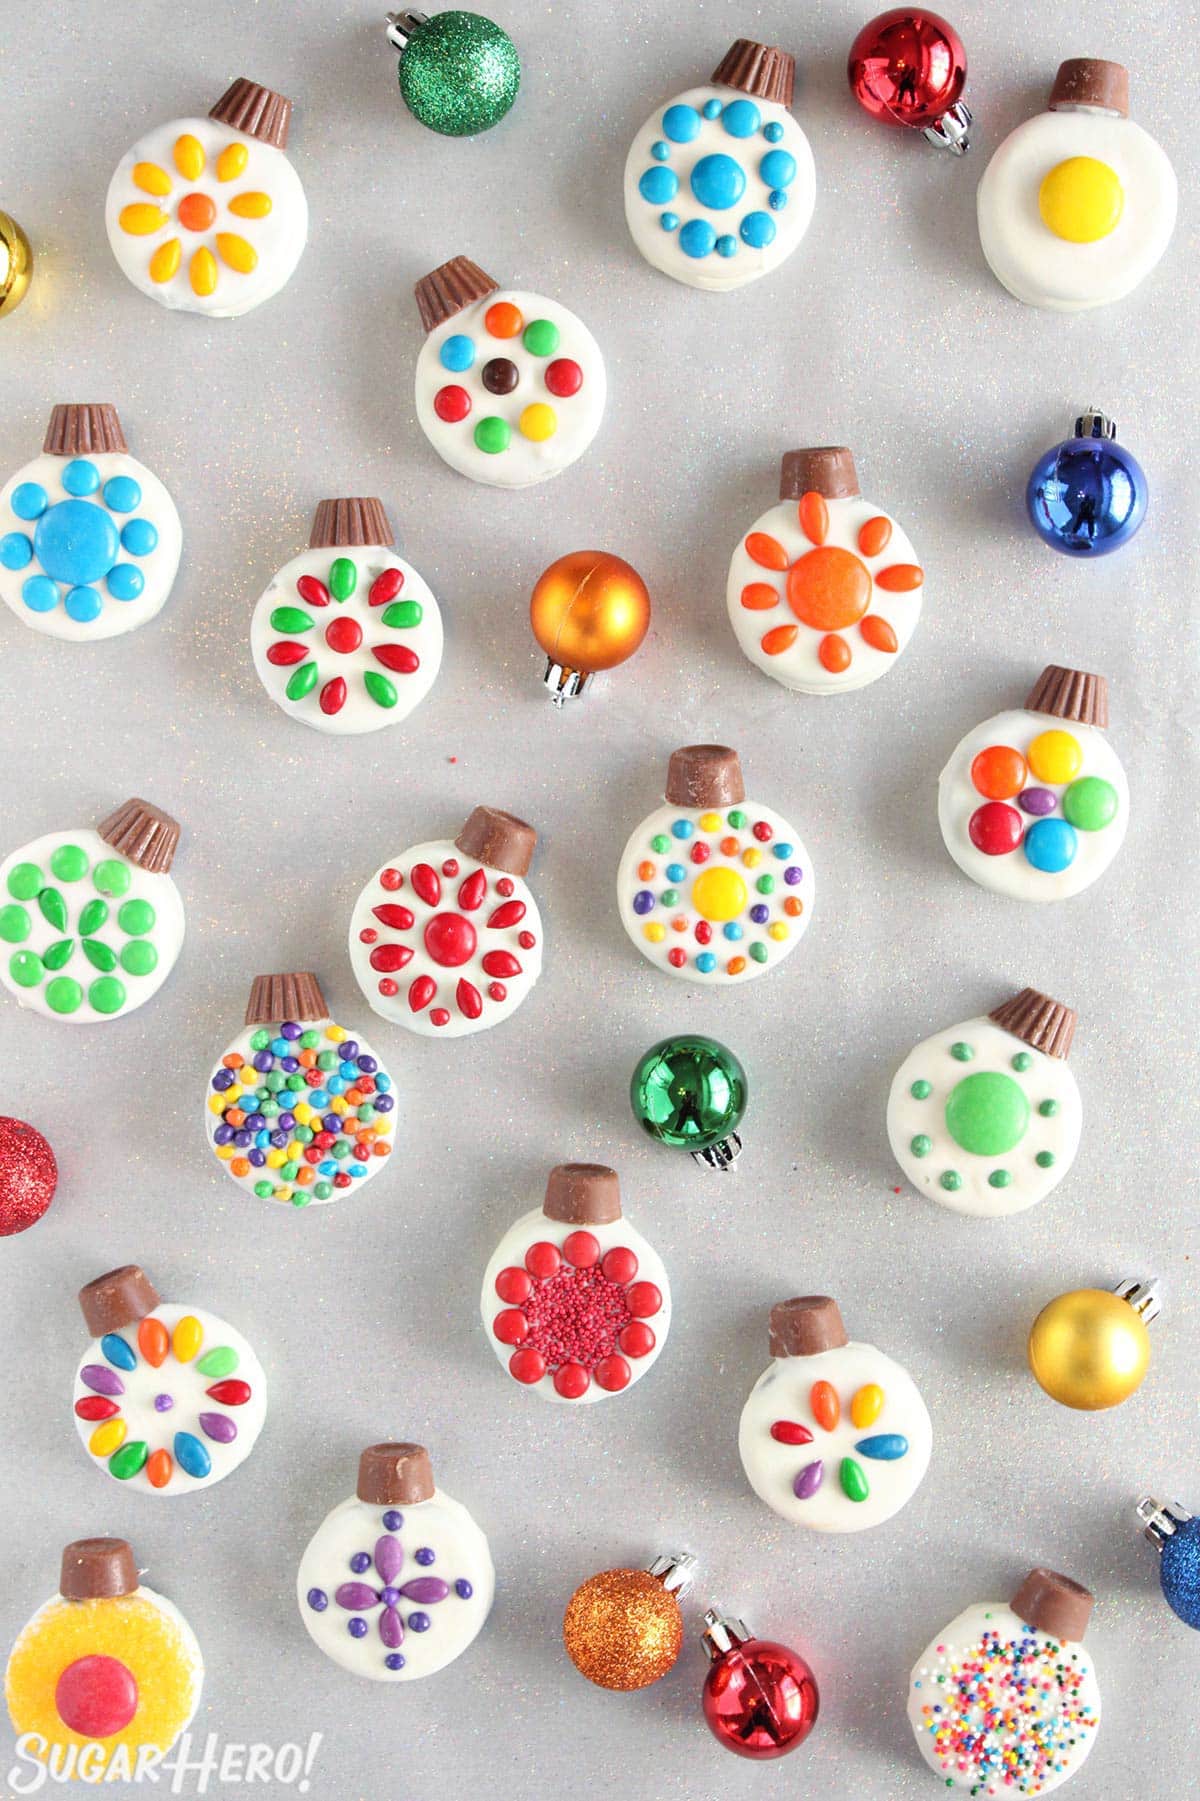 Overhead shot of colorful Oreo Cookie Christmas Ornaments on a silver background with colorful ornaments around.